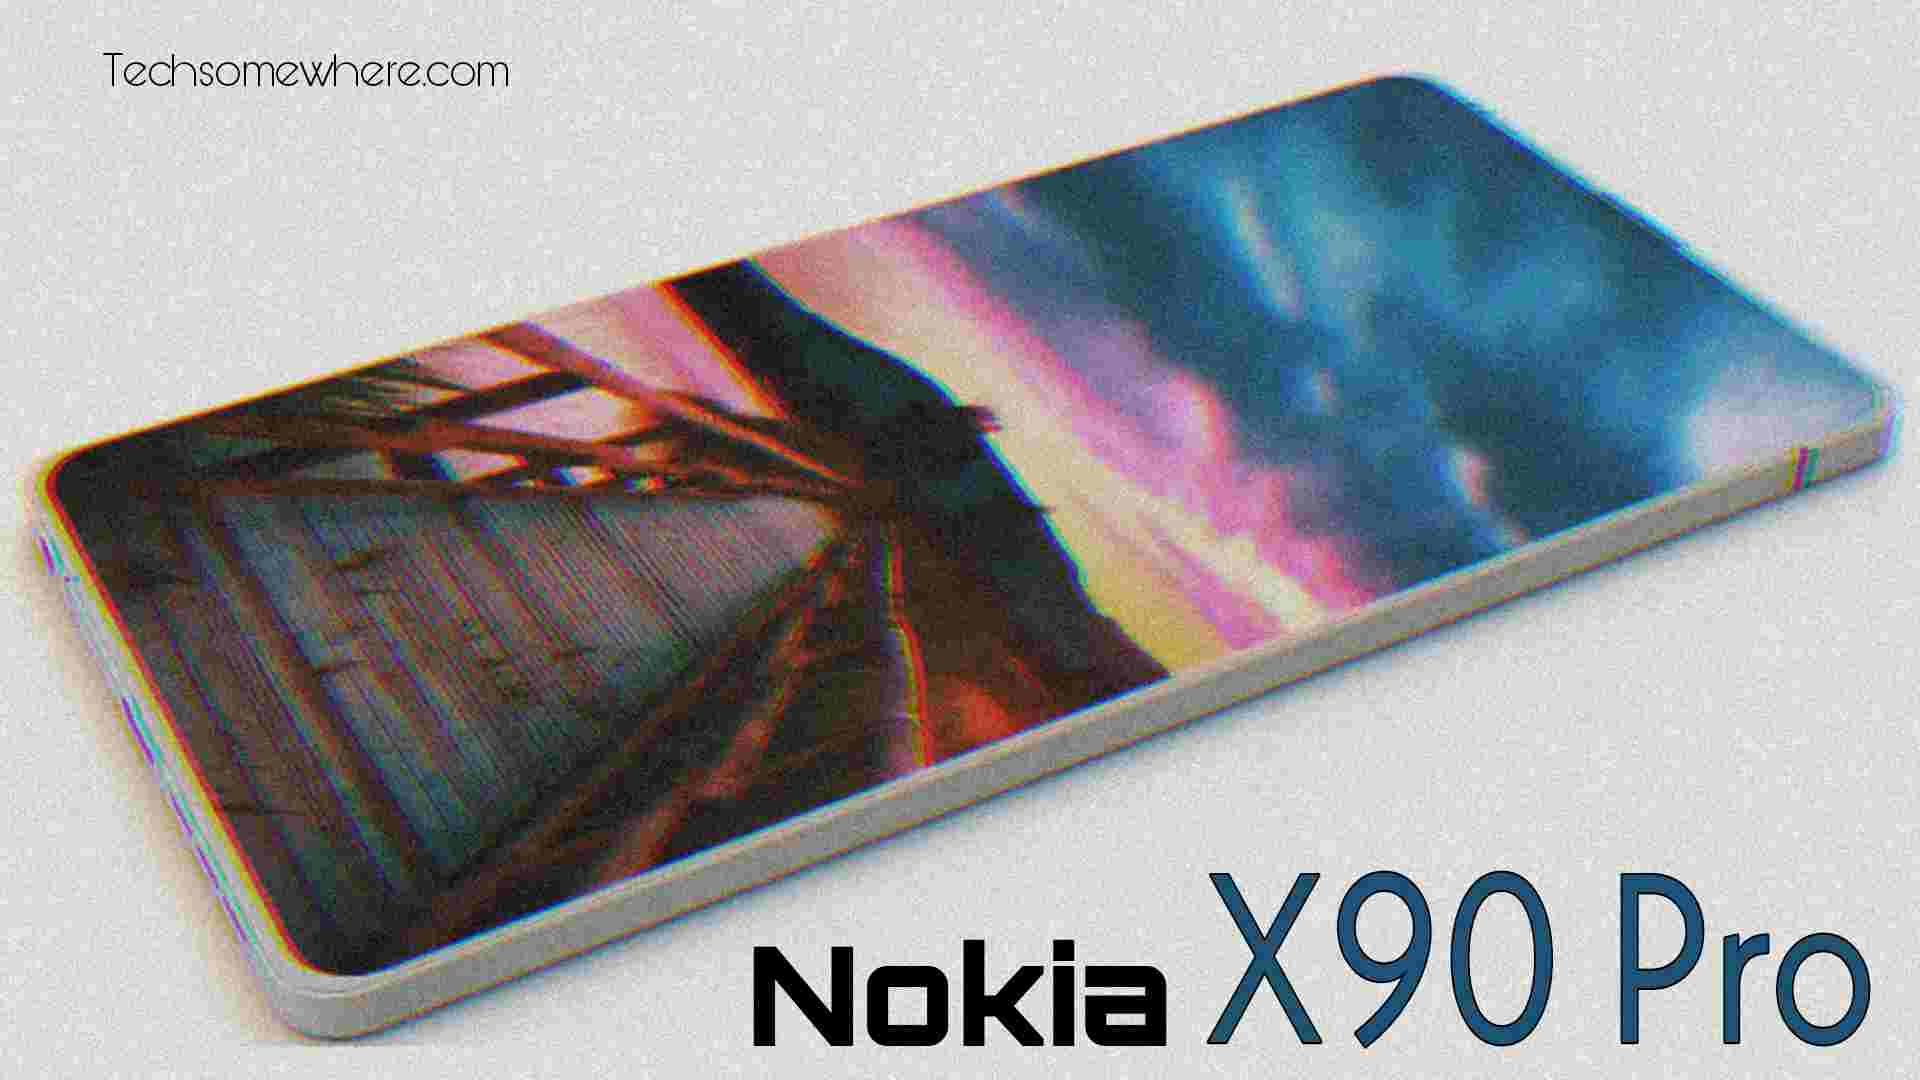 Nokia X90 Pro - First Look, Specifications, Price & Release Date